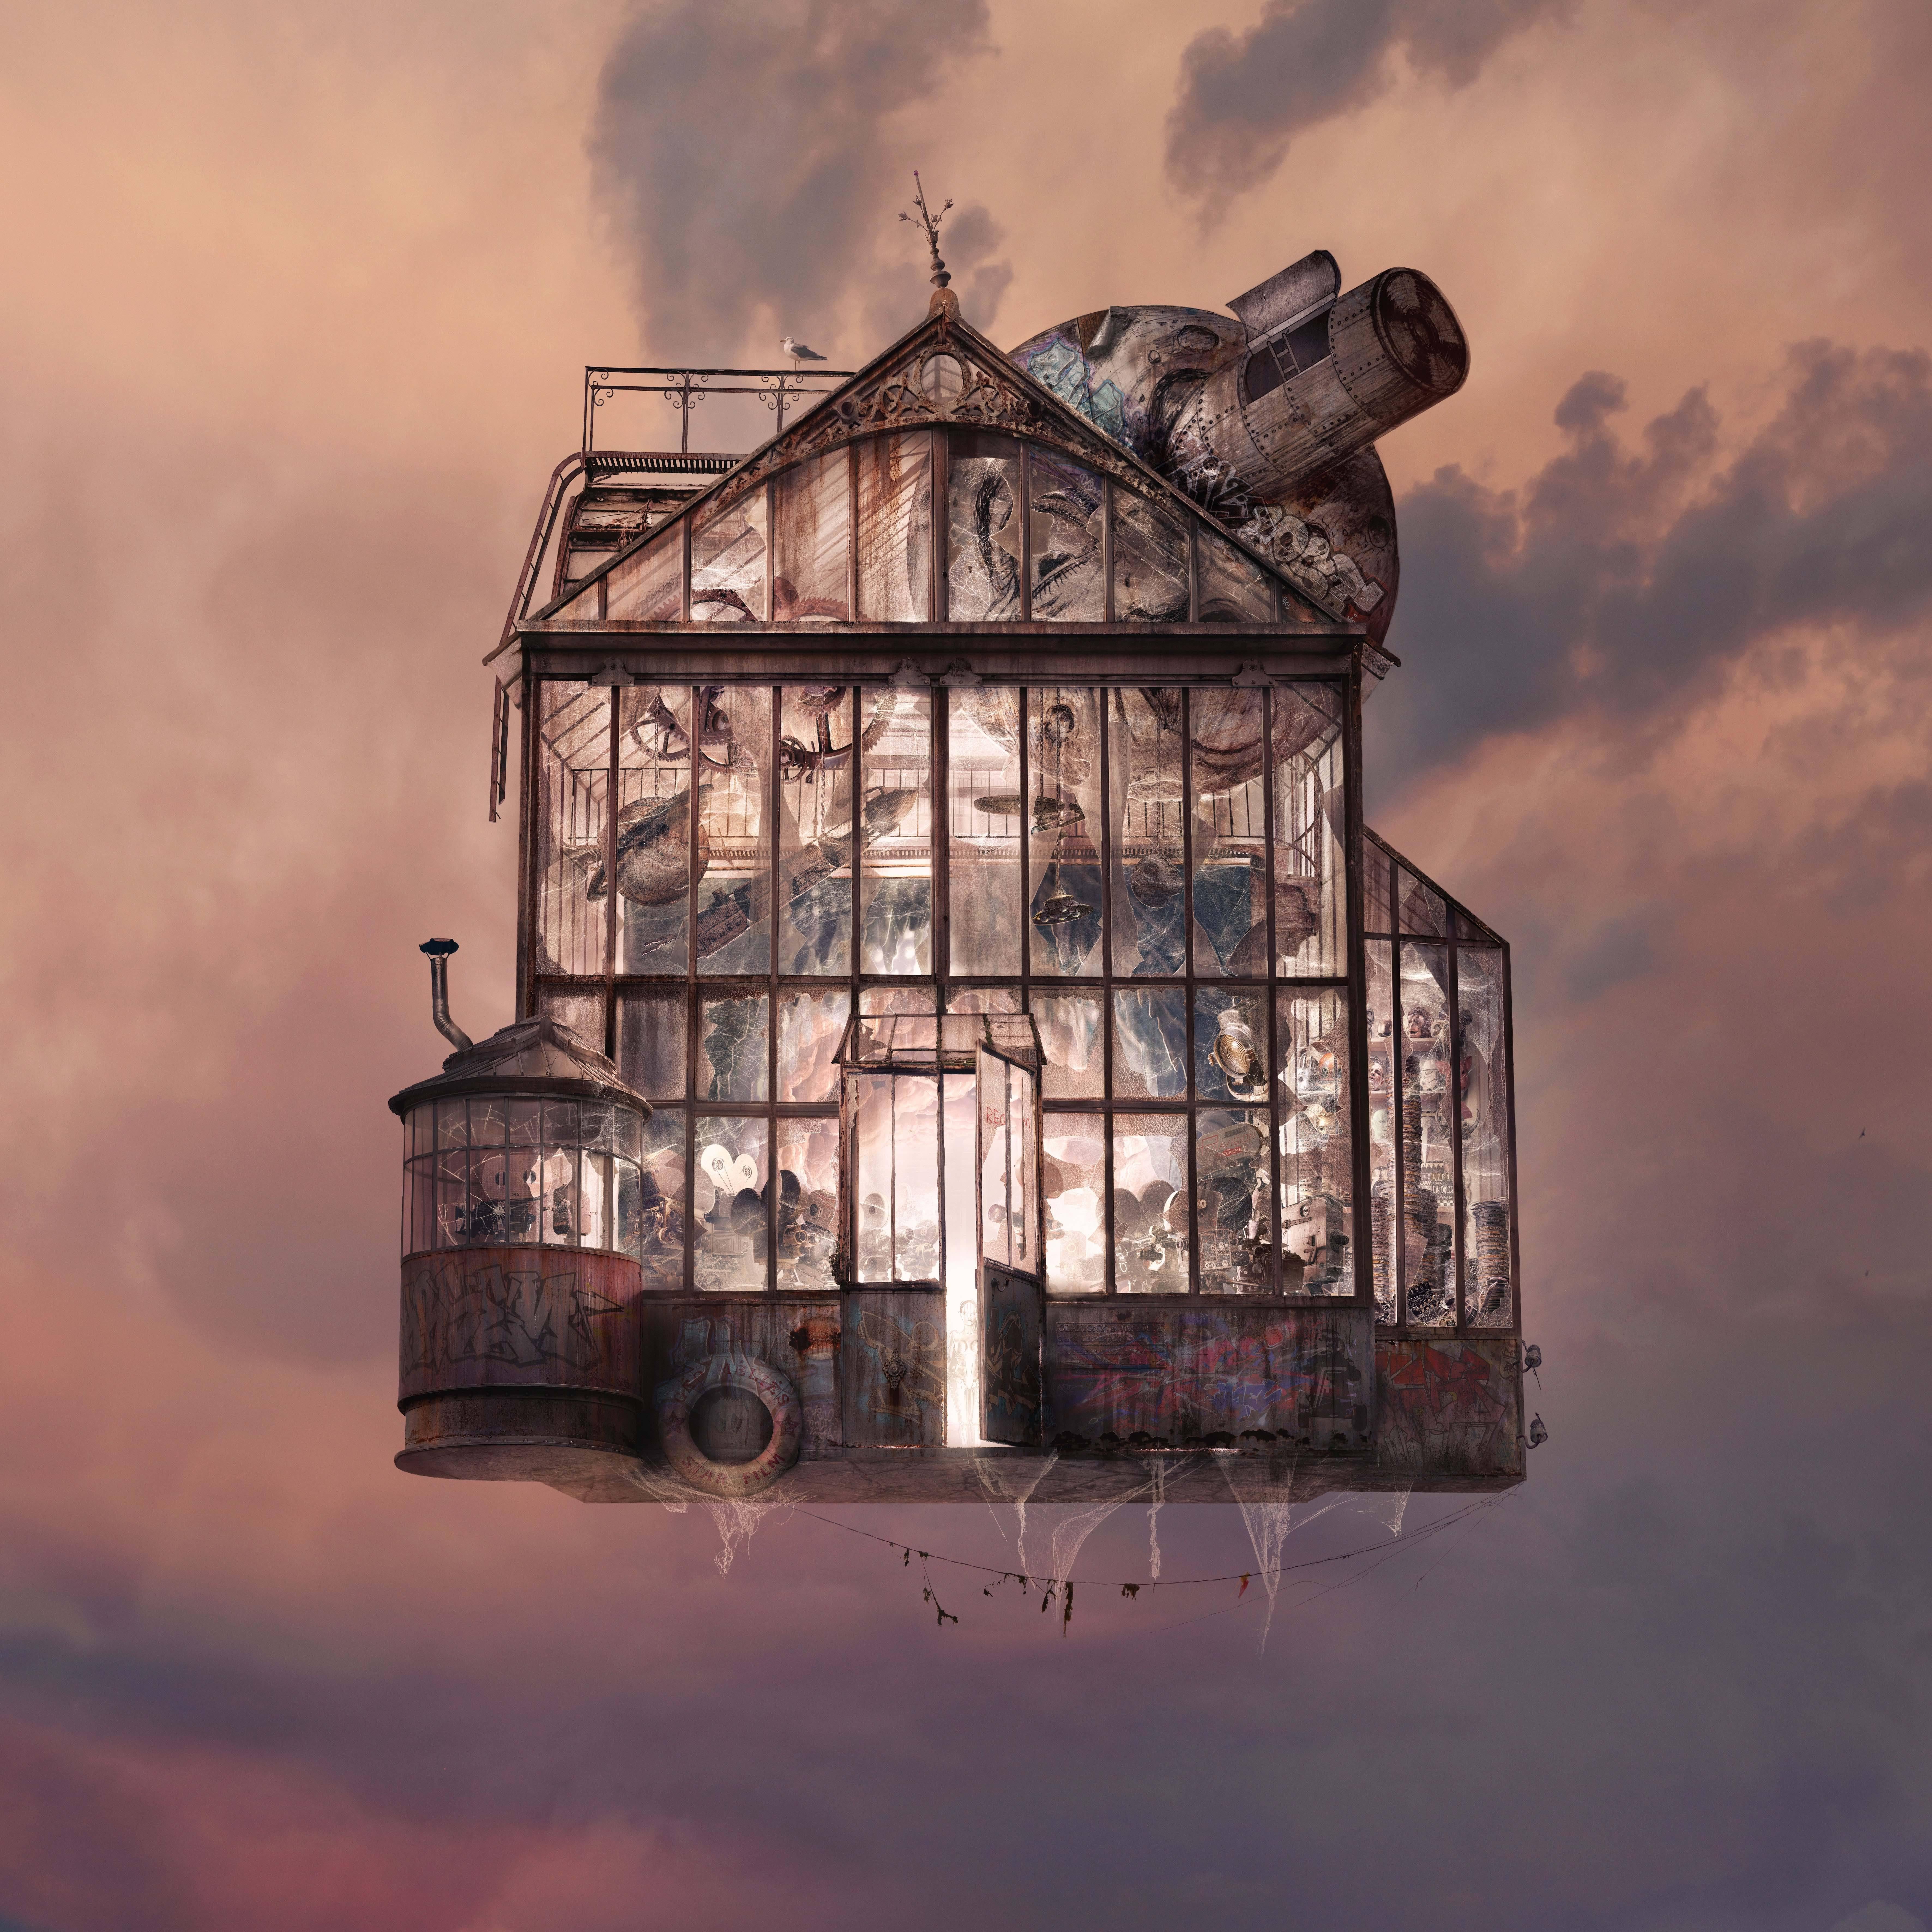 Moon - Contemporary whimsical digital color photo of flying house